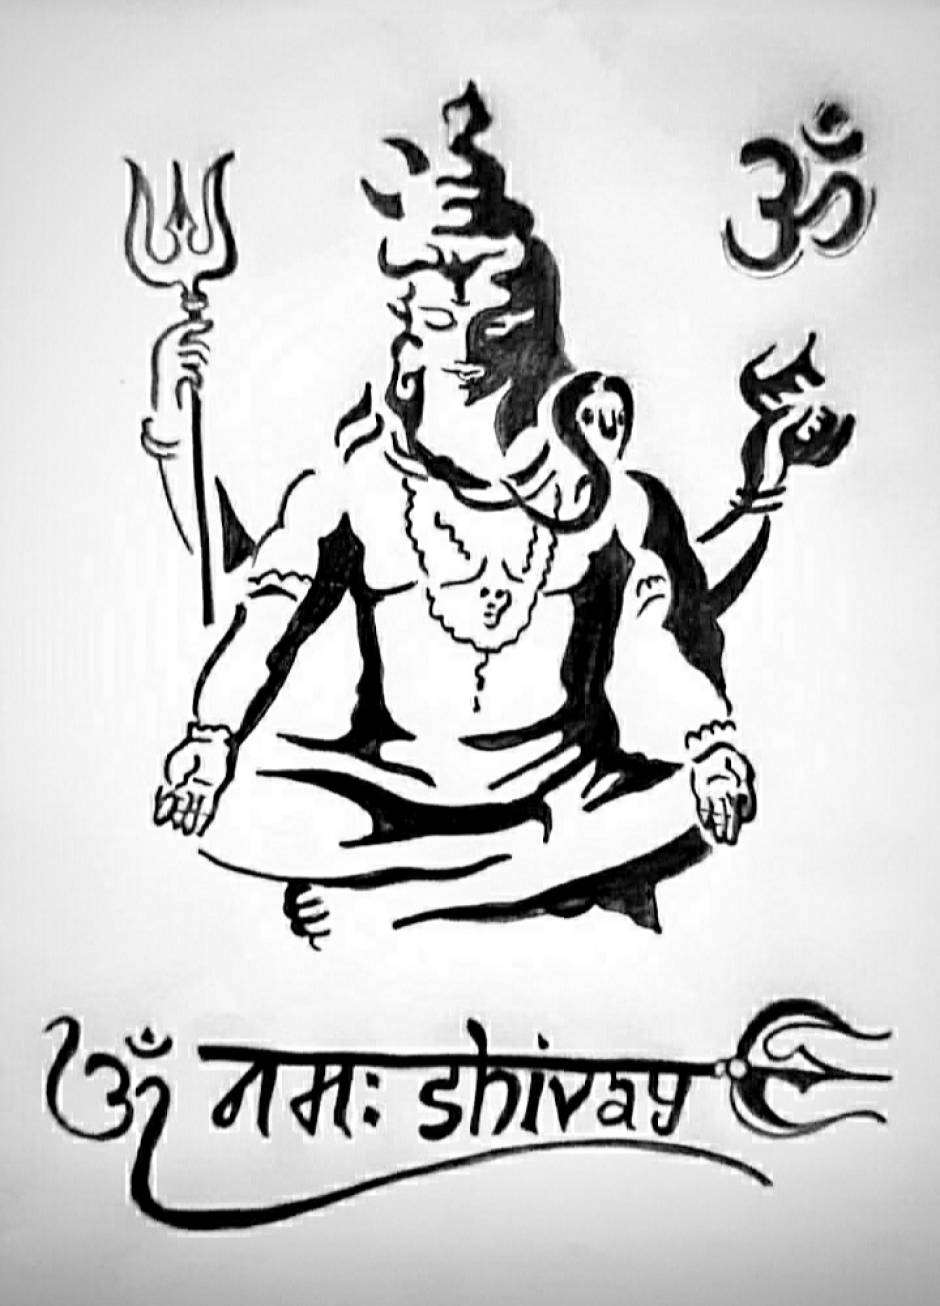 How to draw Lord Shiva by mlspcart on DeviantArt